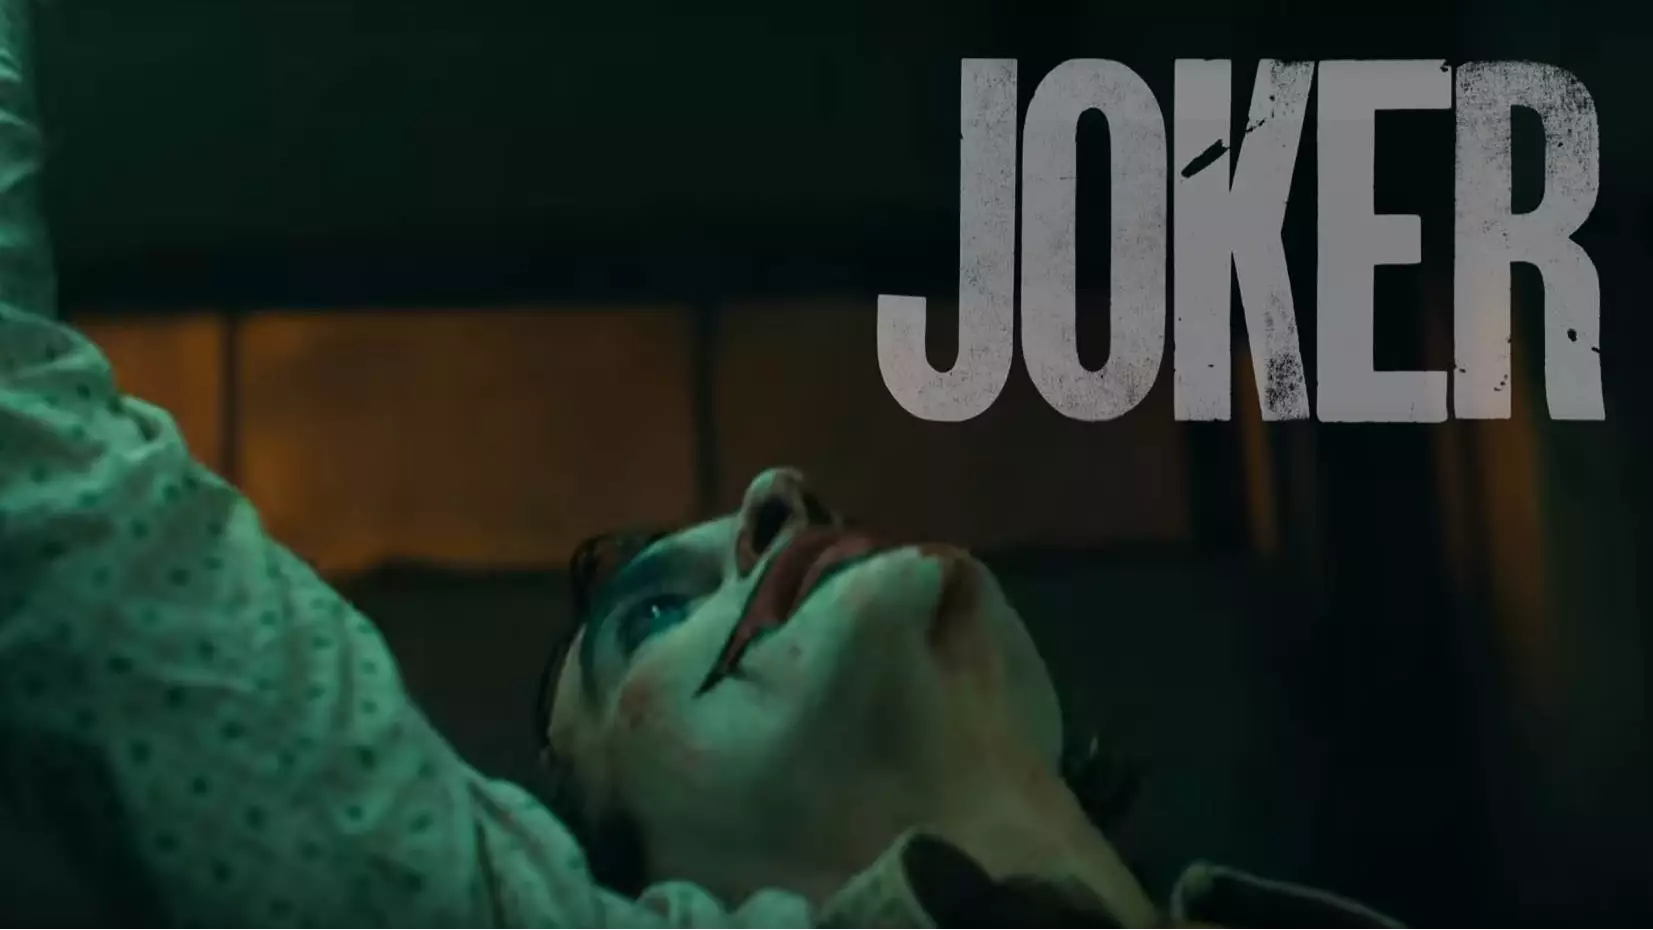 What's The Joker Movie Release Date In UK and US? The Full Cast Including Joaquin Phoenix And Robert De Niro